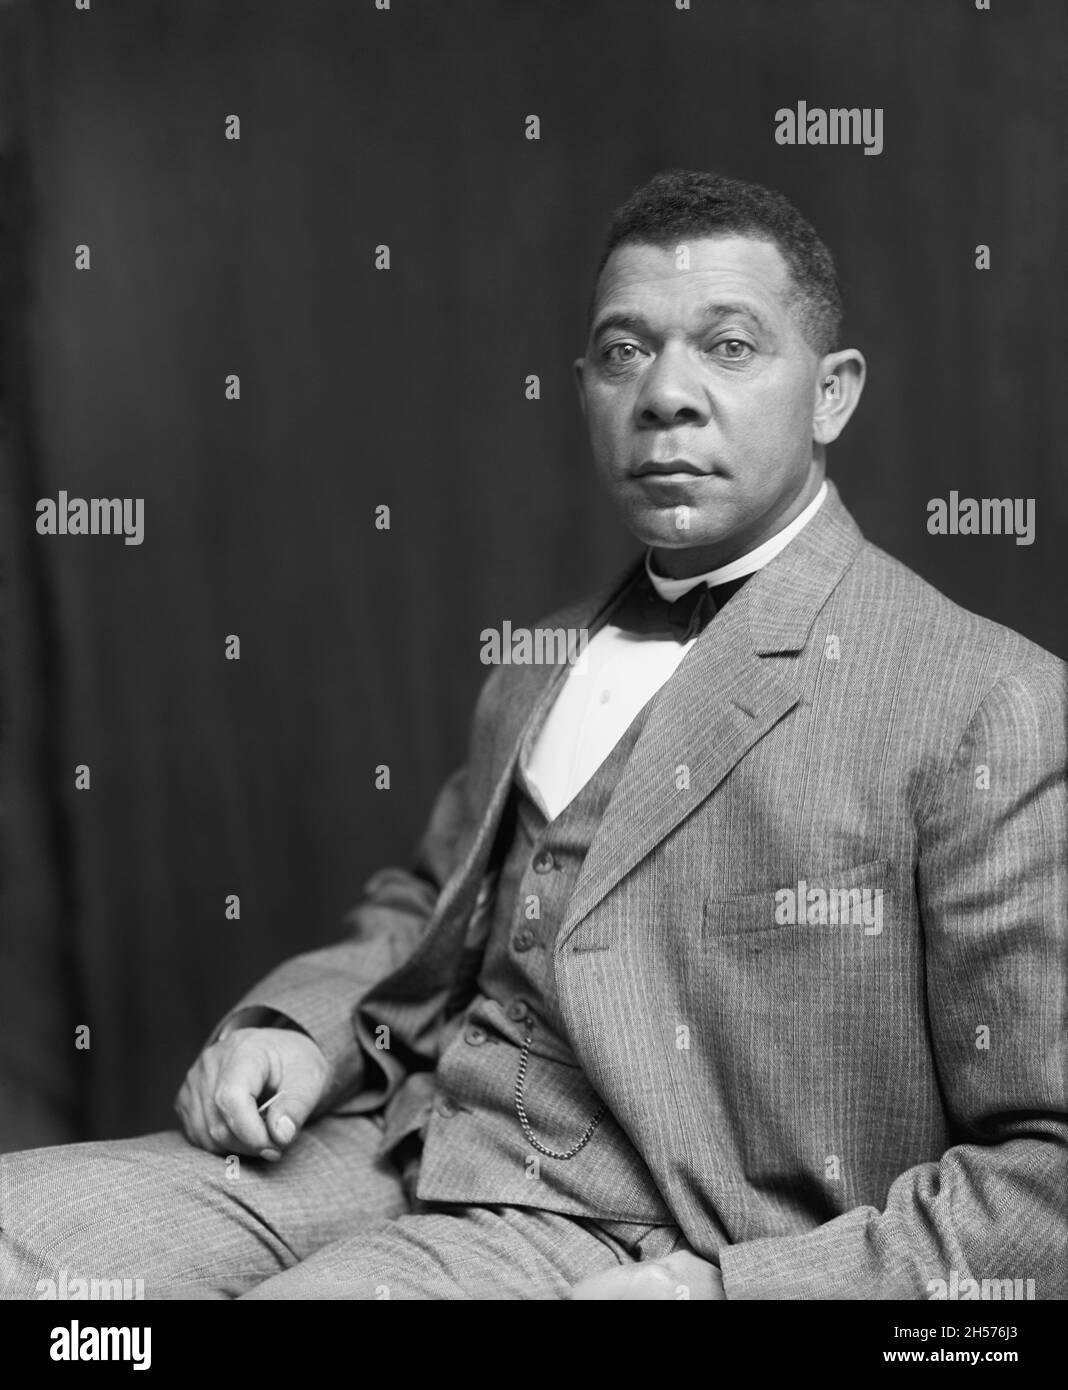 Booker T Washington American educator, author, and adviser to several presidents of the United States photographed by Frances Benjamin Johnston. Stock Photo